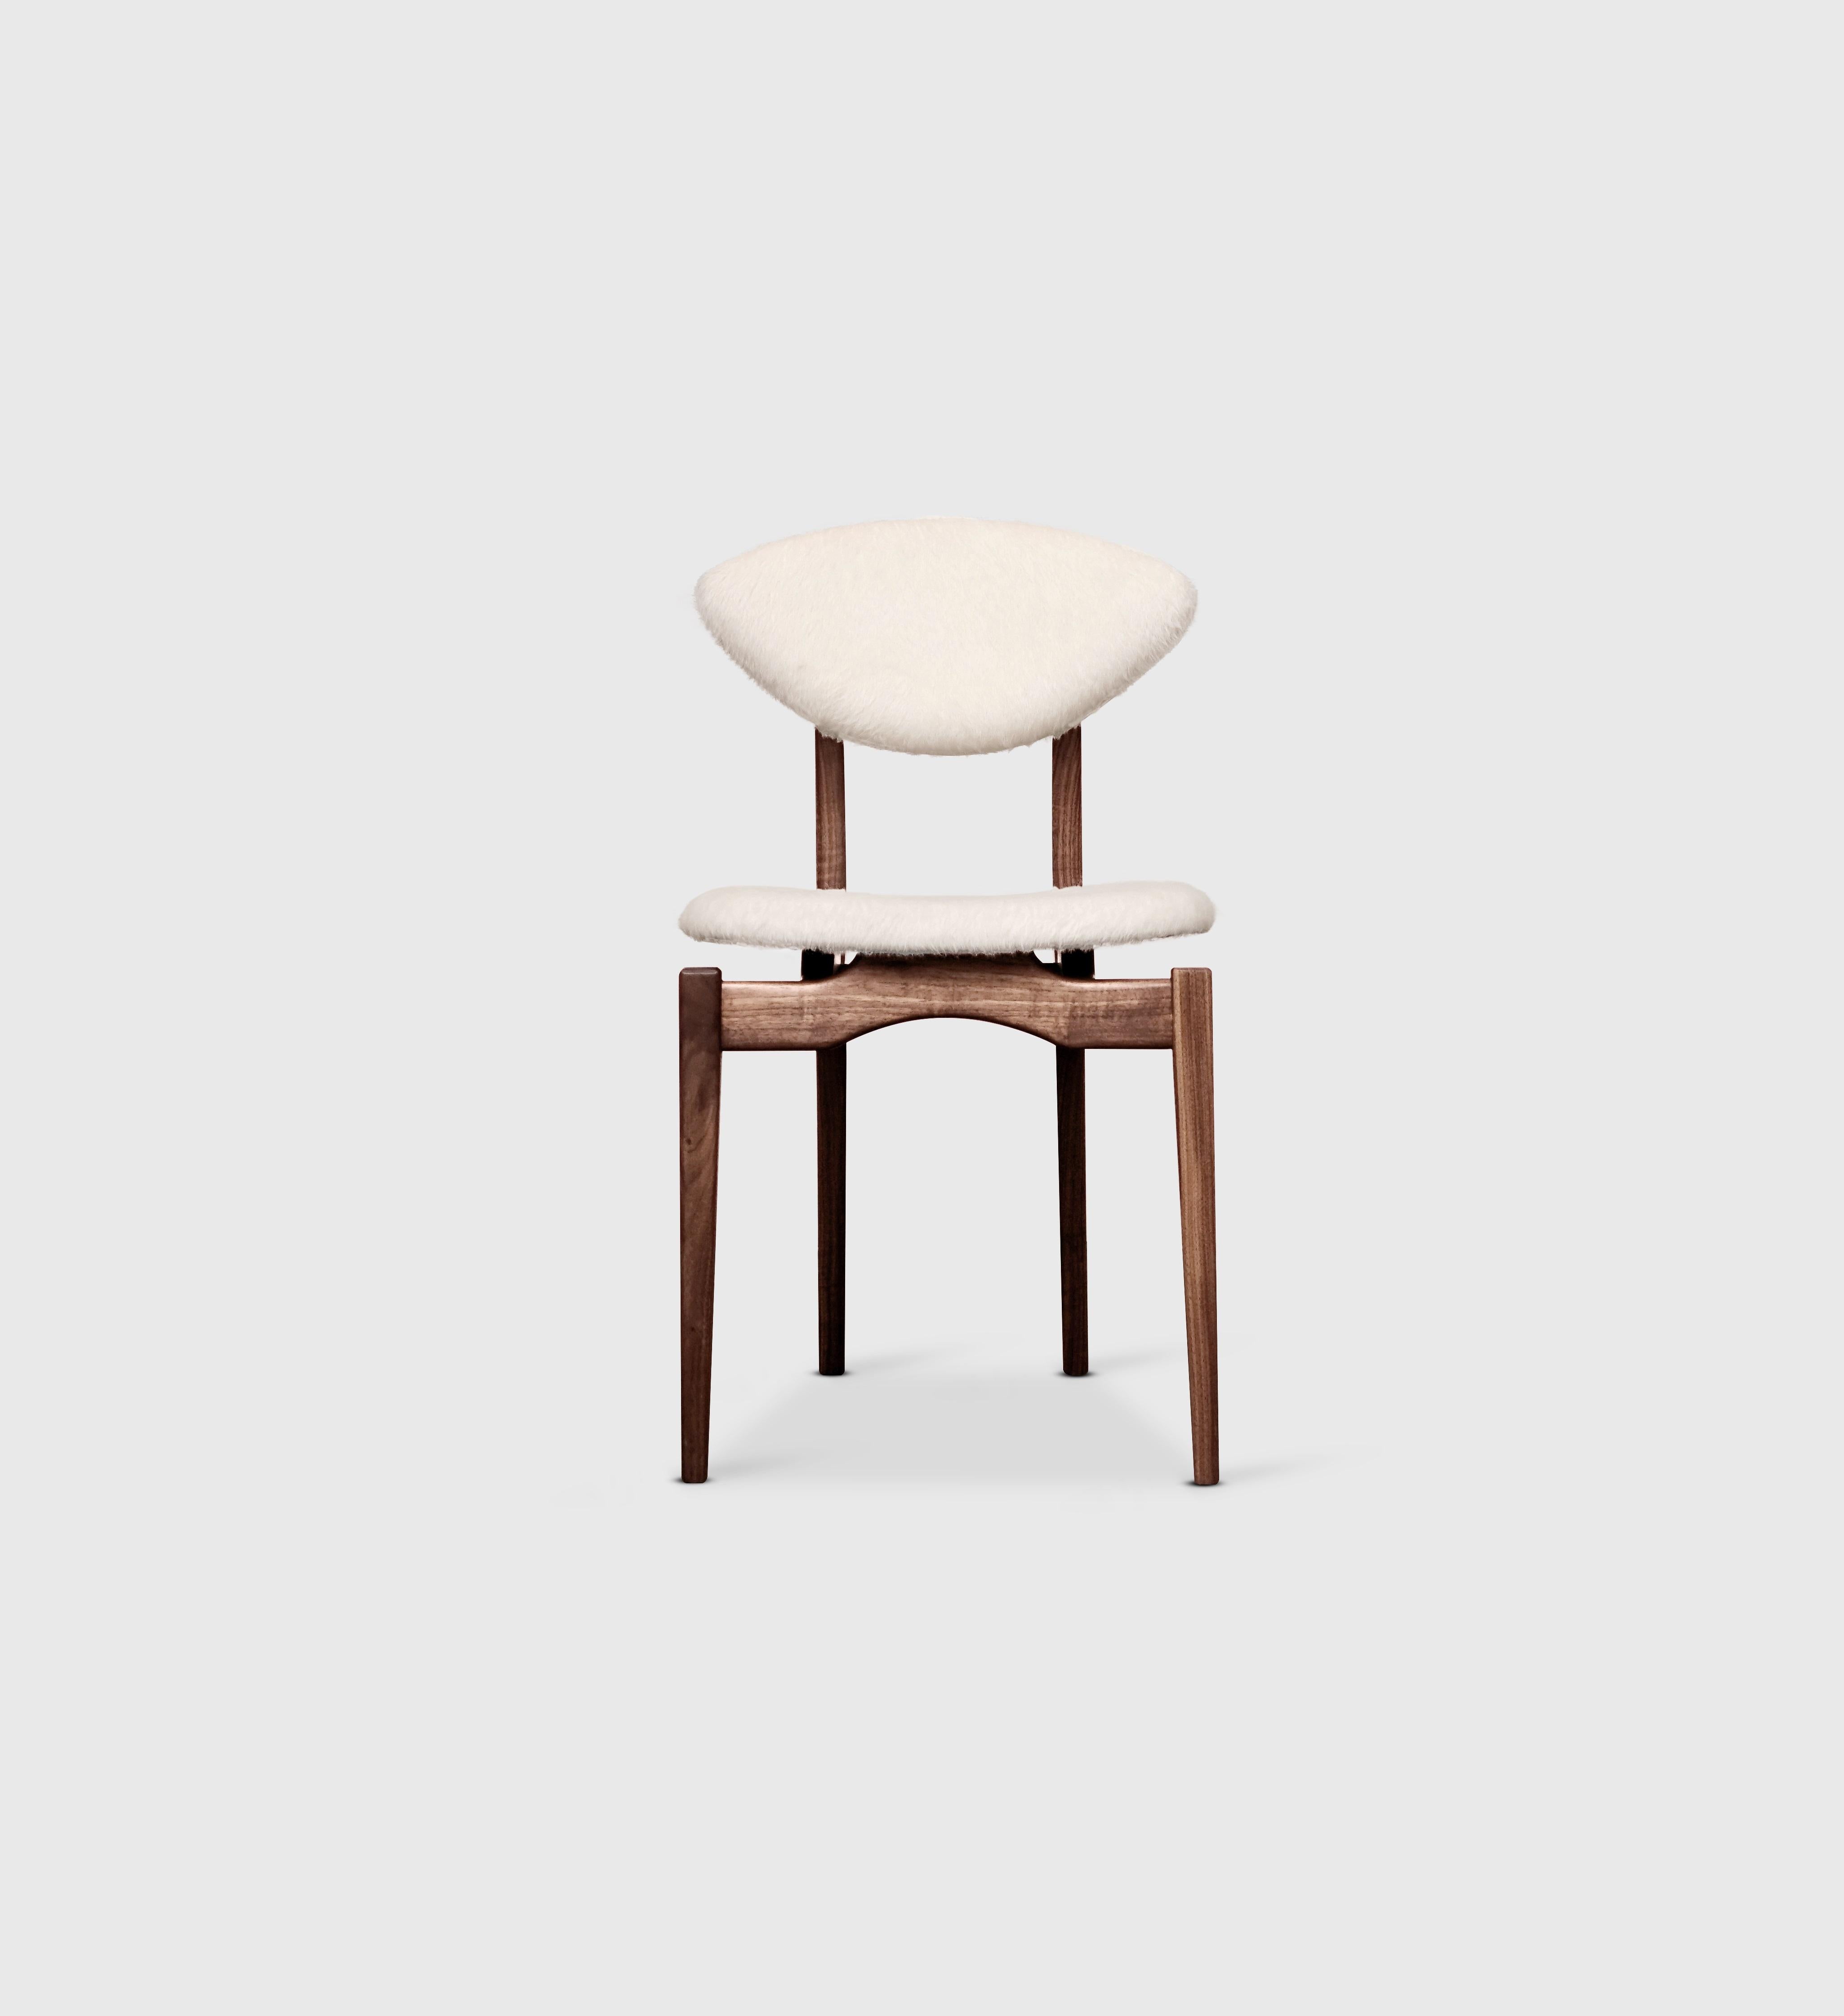 White Femur dining chair by Atra Design
Dimensions: D 58.5 x W 45 x H 85 cm
Materials: fabric, walnut
Available in leather or fabric seat and in other colors.

Atra Design
We are Atra, a furniture brand produced by Atra form a mexico